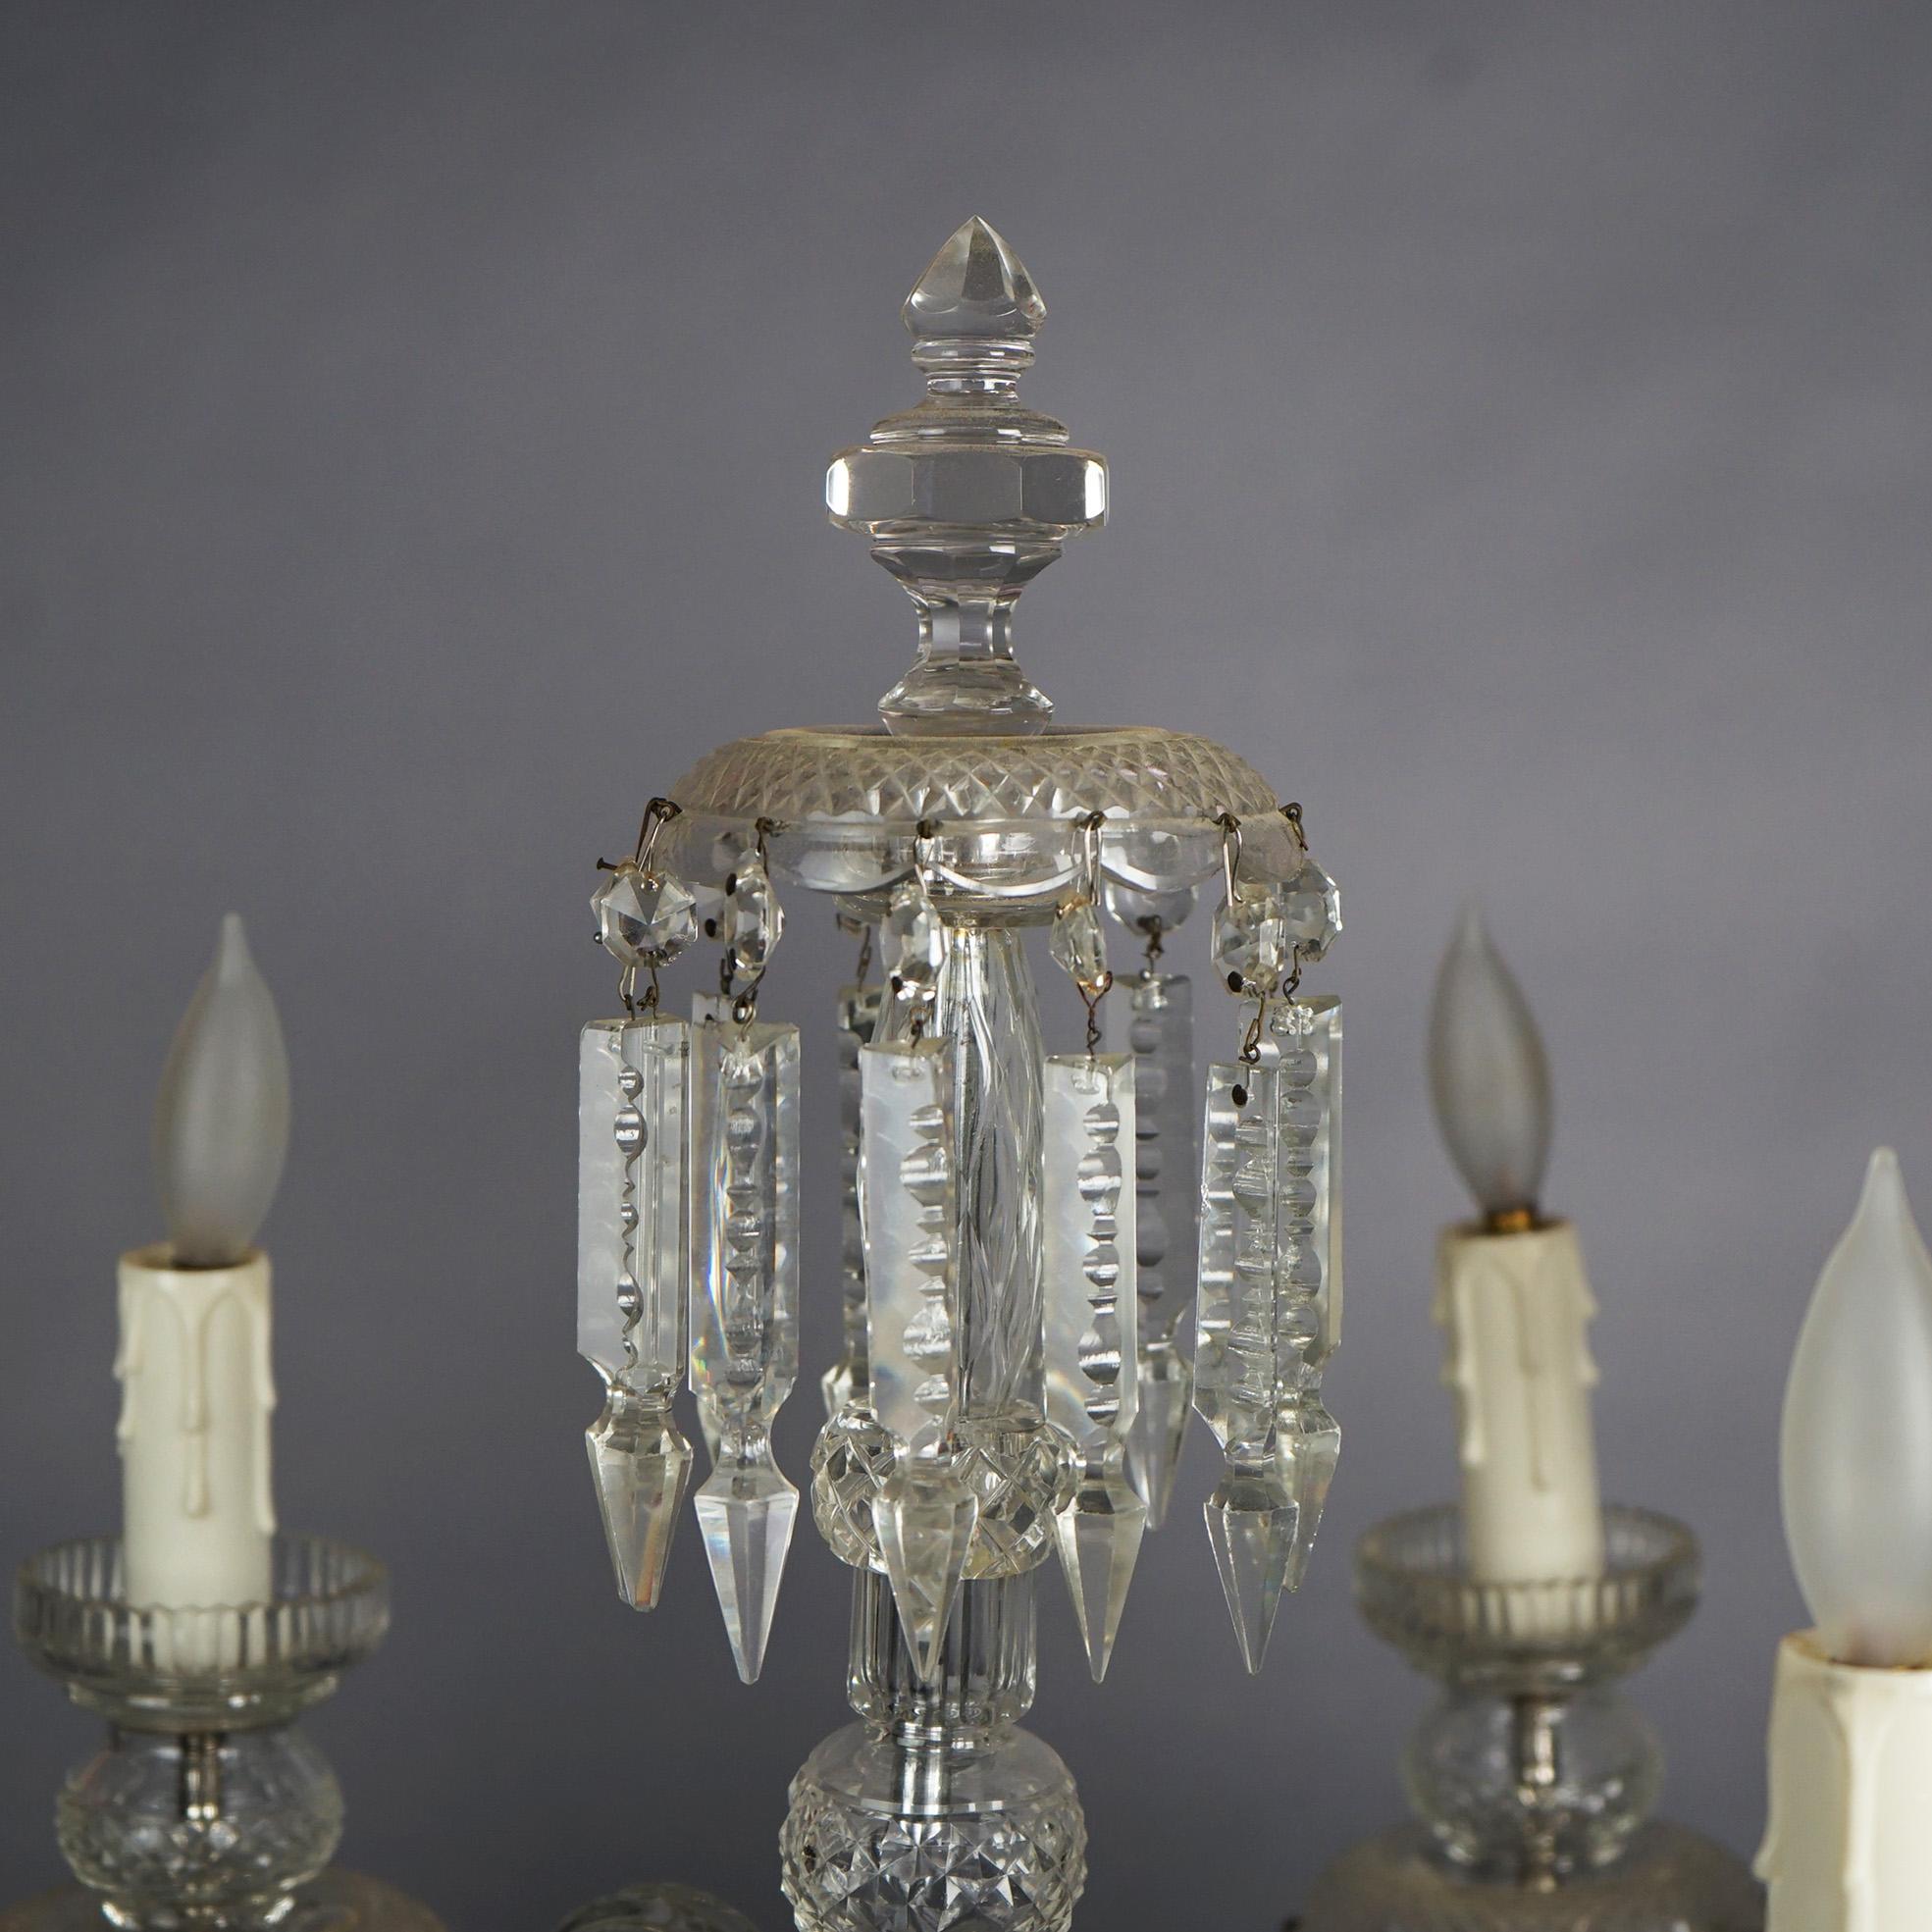 20th Century Antique Matching Pair of Cut Glass & Crystal Candelabra Table Lamps Circa 1920